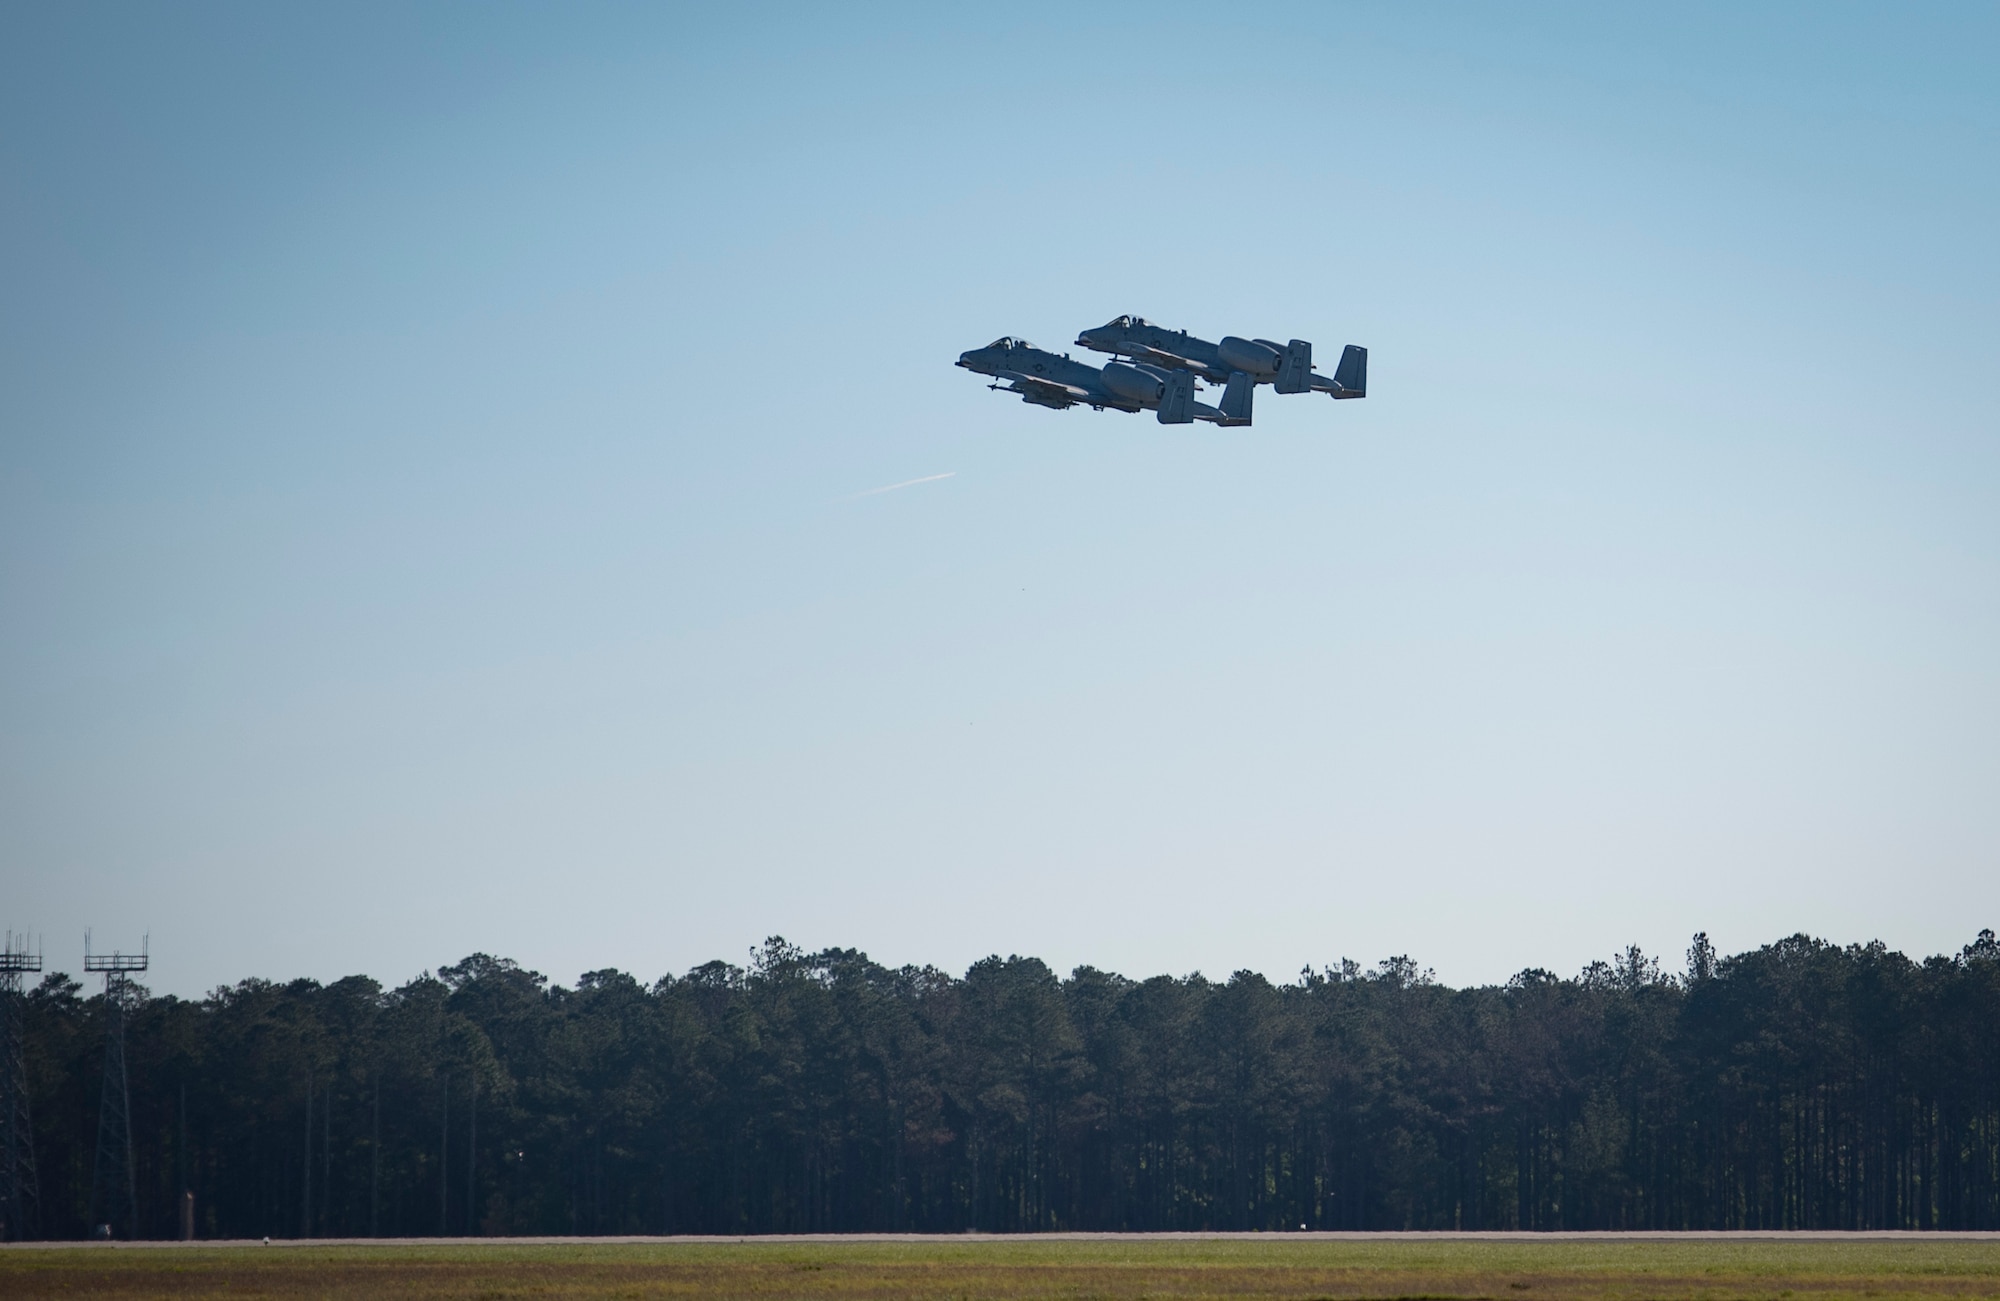 Maj. Matthew Shelly, 23 Wing director of inspections and Capt. Christopher Shelly, 76th Fighter Squadron chief of standards and evaluations, take off in A-10C Thunderbolt IIs, April 8, 2017, at Moody Air Force Base, Ga. The brothers flew in formation together for the first time, fulfilling their childhood dream while also contributing to total force integration, the use of multiple components of the Air Force, which can include active duty, reserve or guard. (U.S. Air Force photo by Airman 1st Class Lauren M. Sprunk)